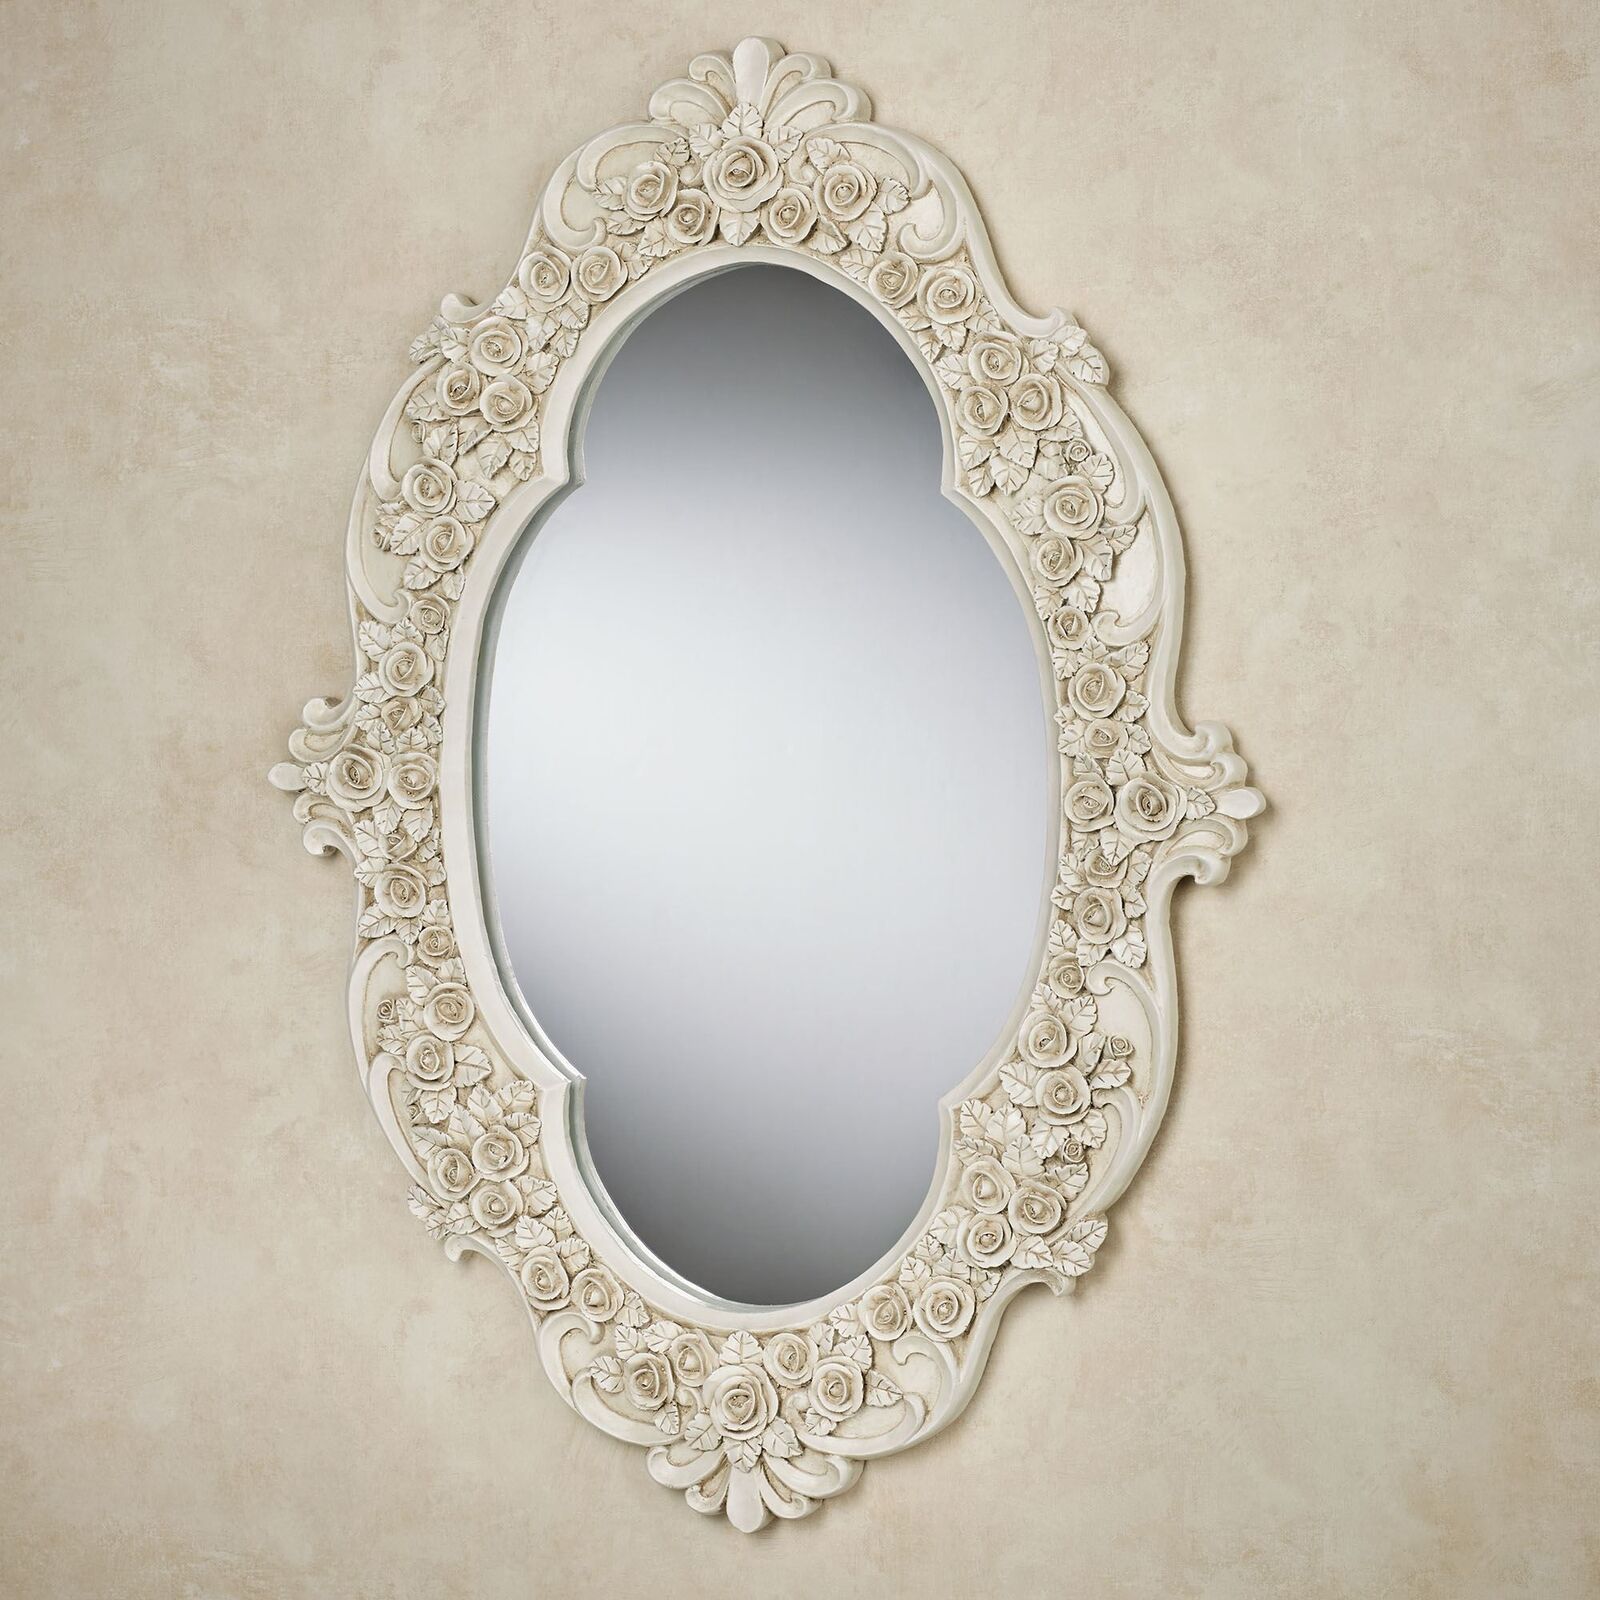 Victoria Rose Oval Wall Mirror Antique Ivory Roses Floral Flowers